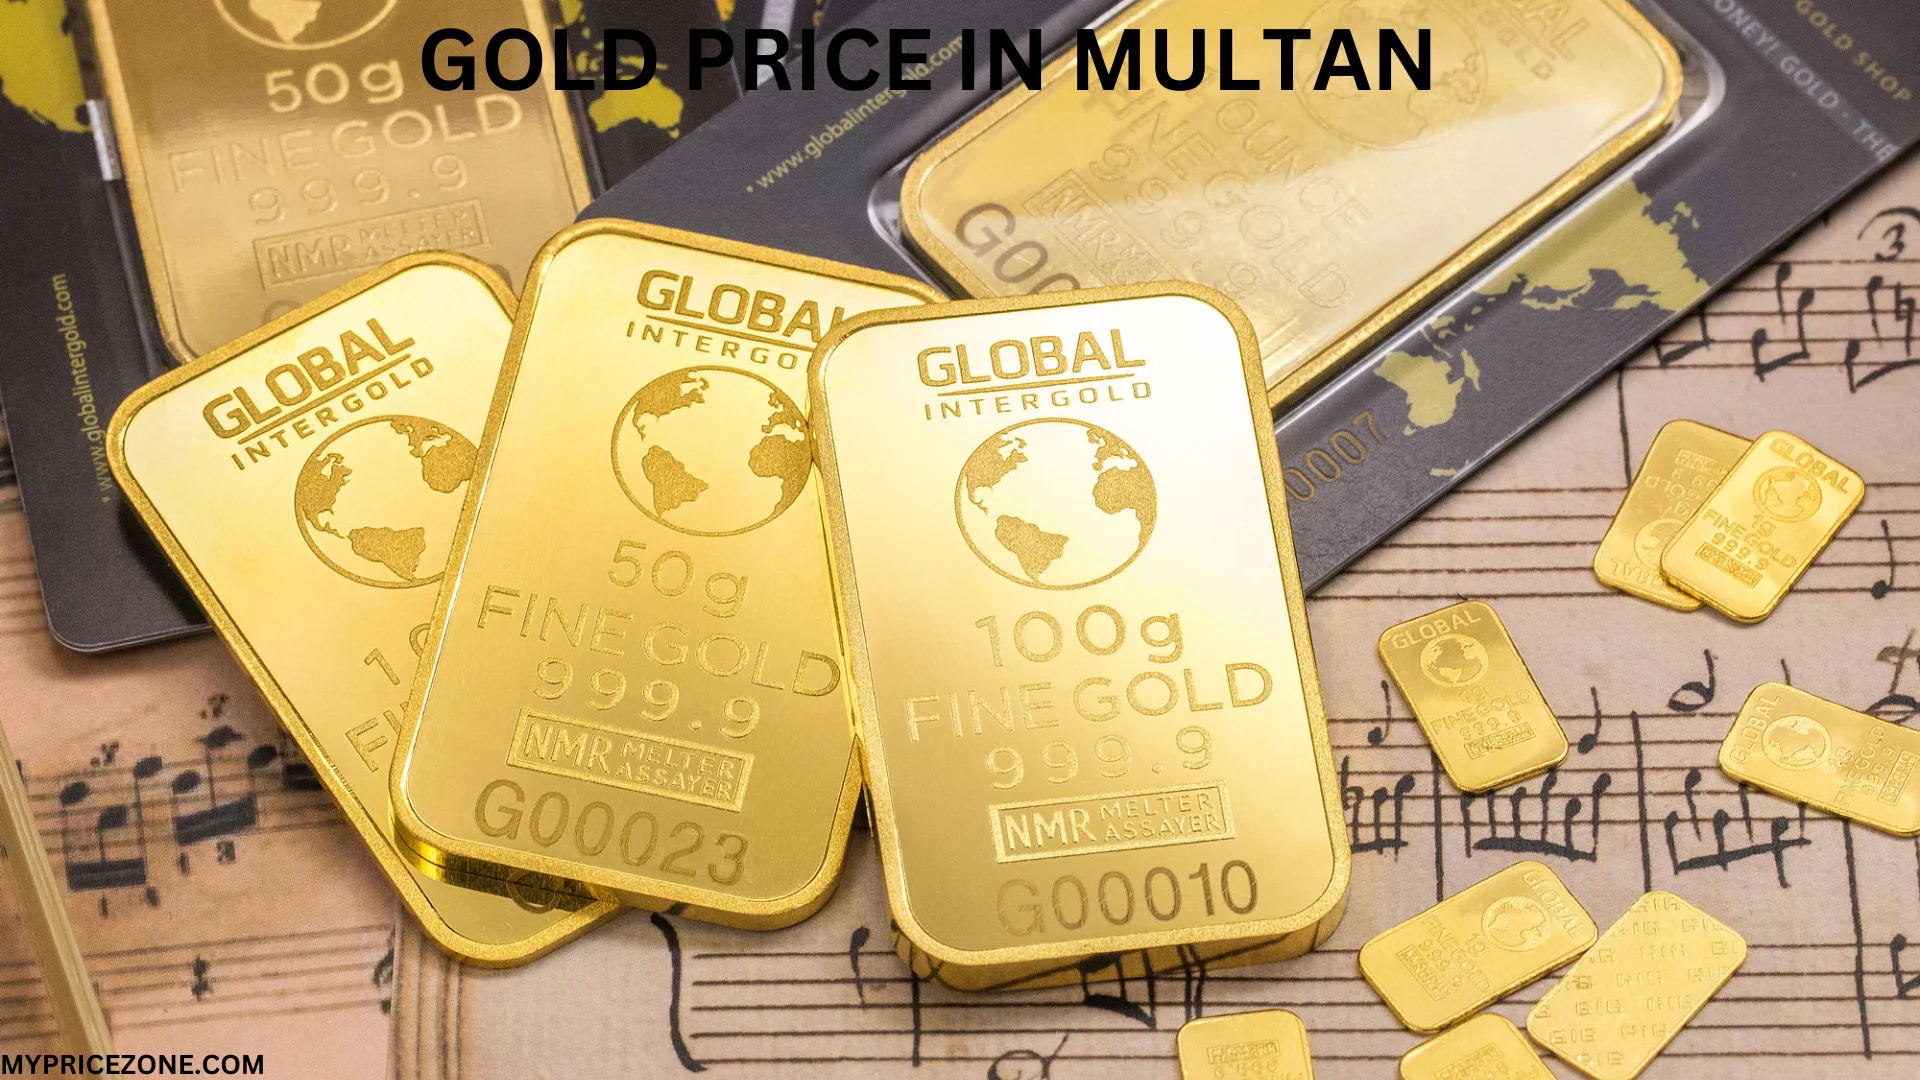 GOLD BARS WITH GOLD PRICE IN MULTAN TODAY